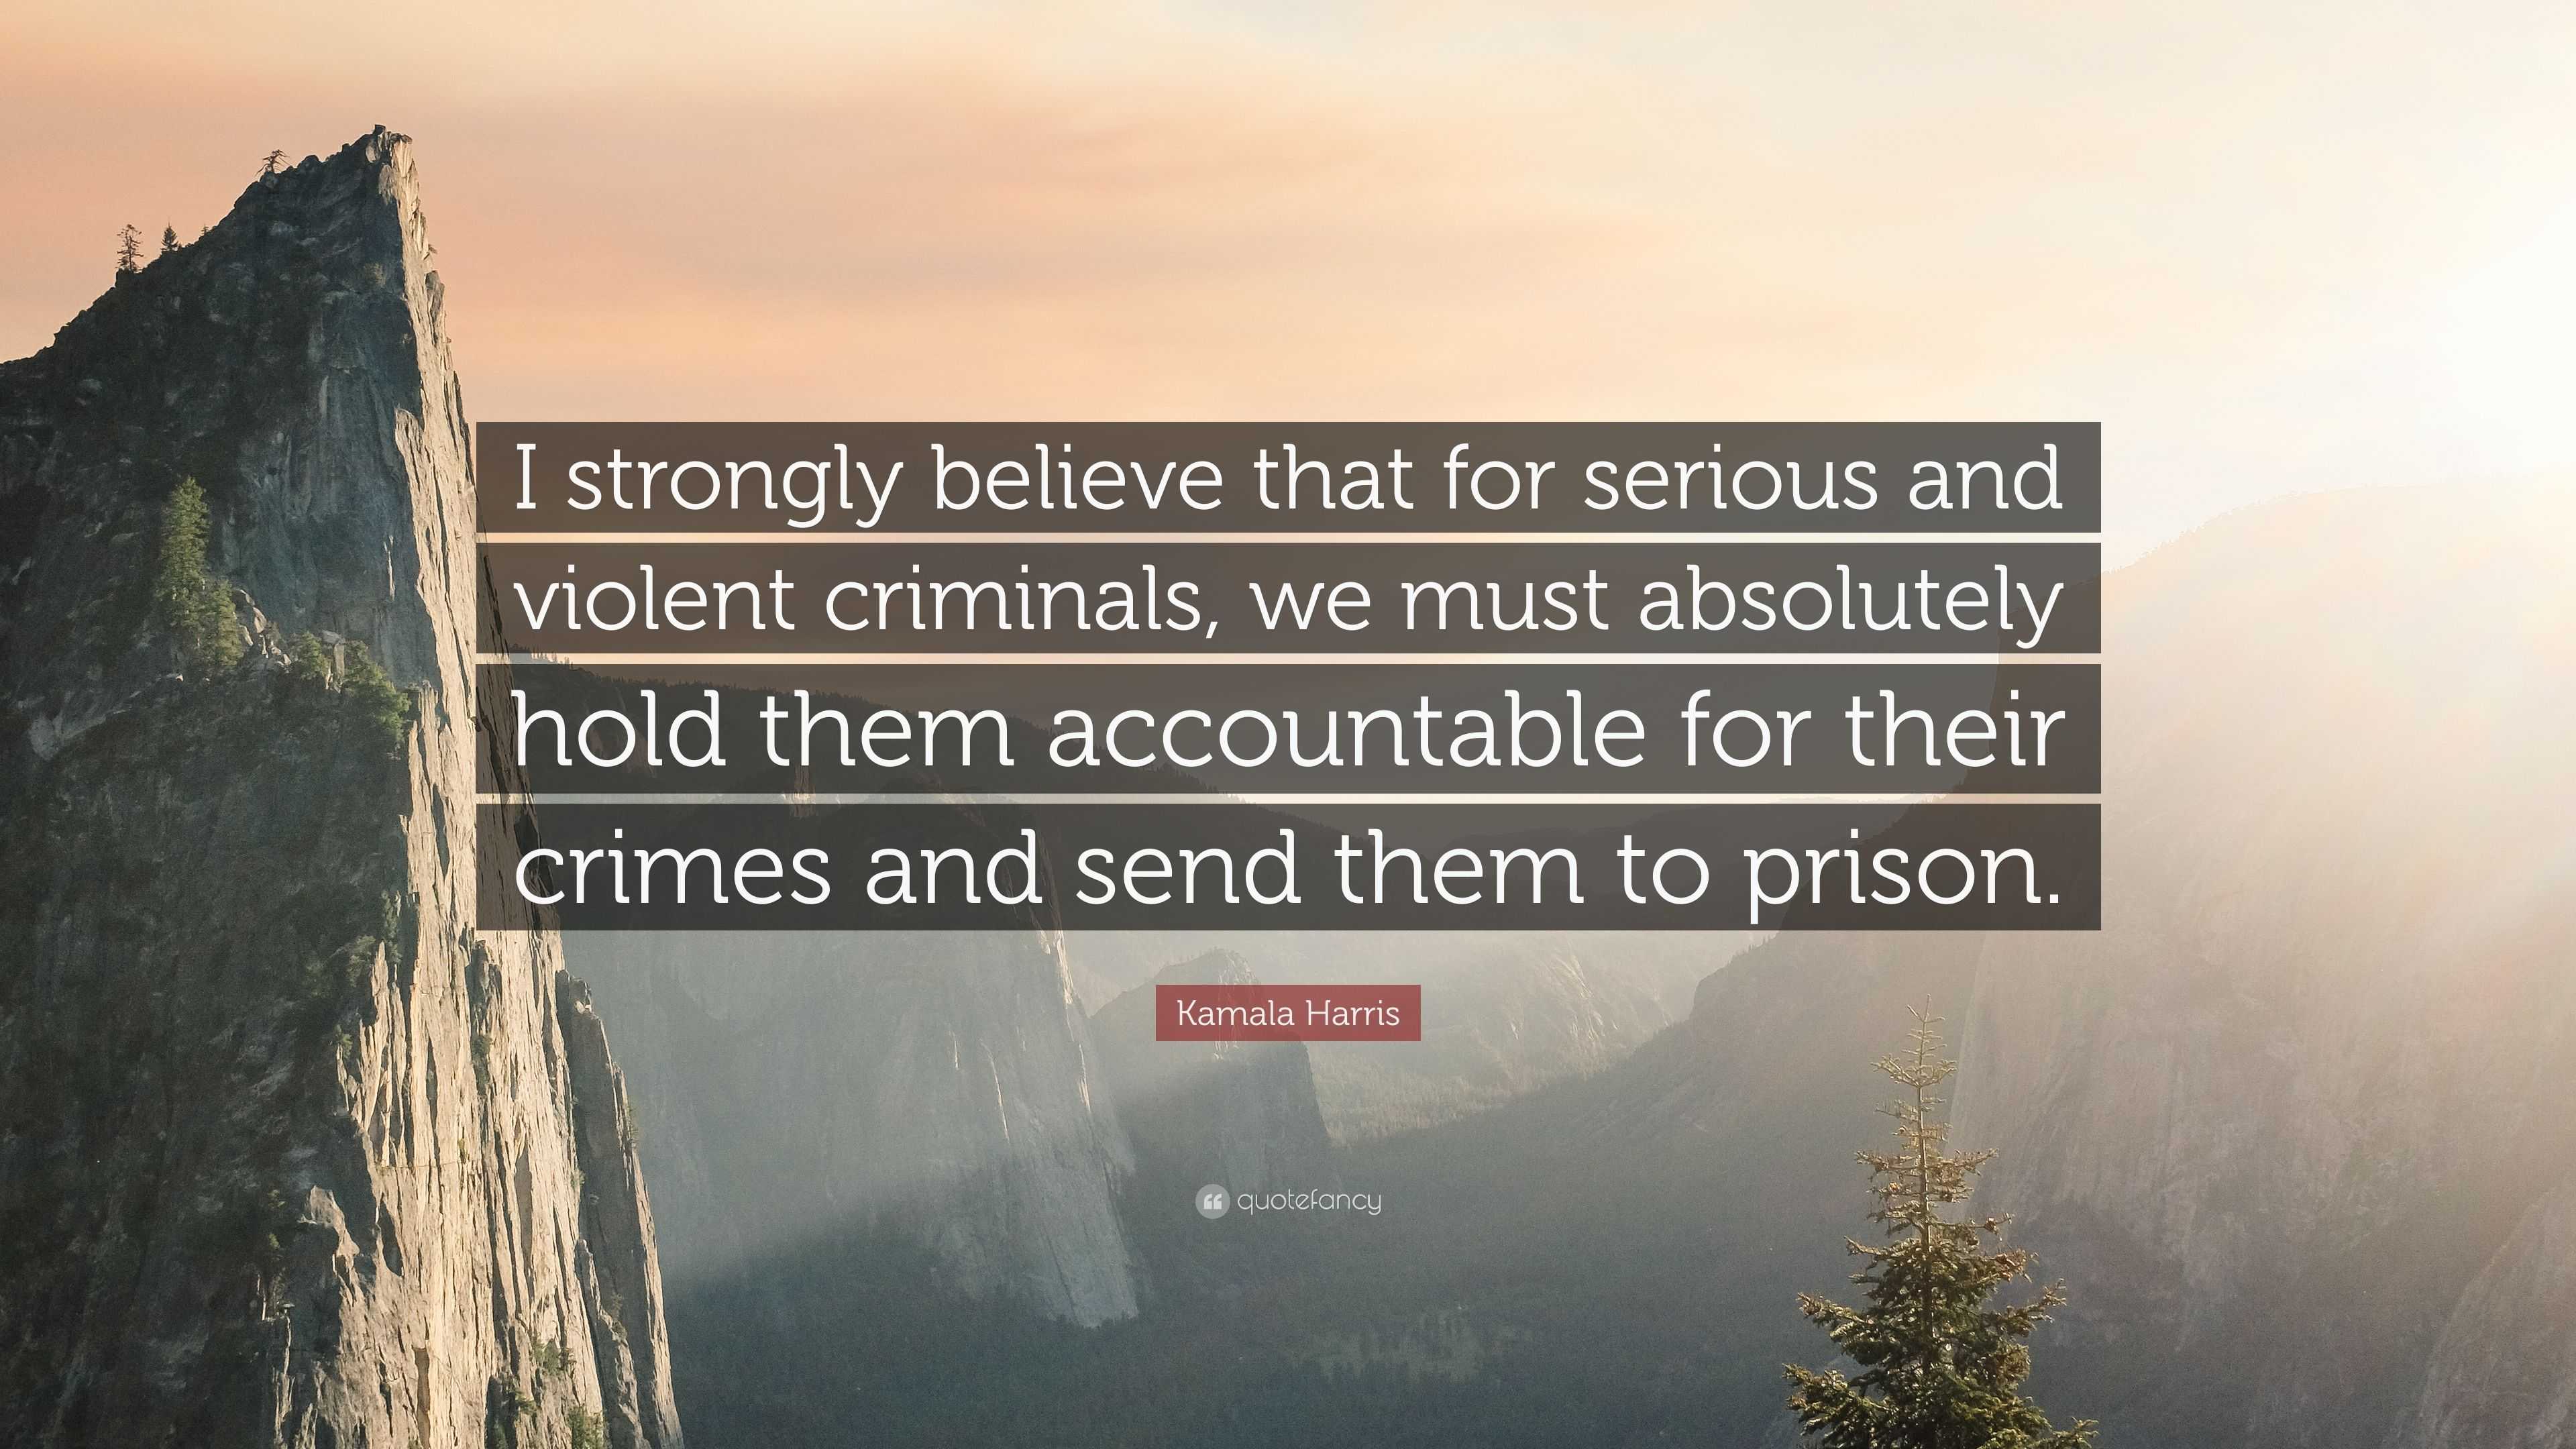 Kamala Harris Quote: “I strongly believe that for serious and violent  criminals, we must absolutely hold them accountable for their crimes and...”